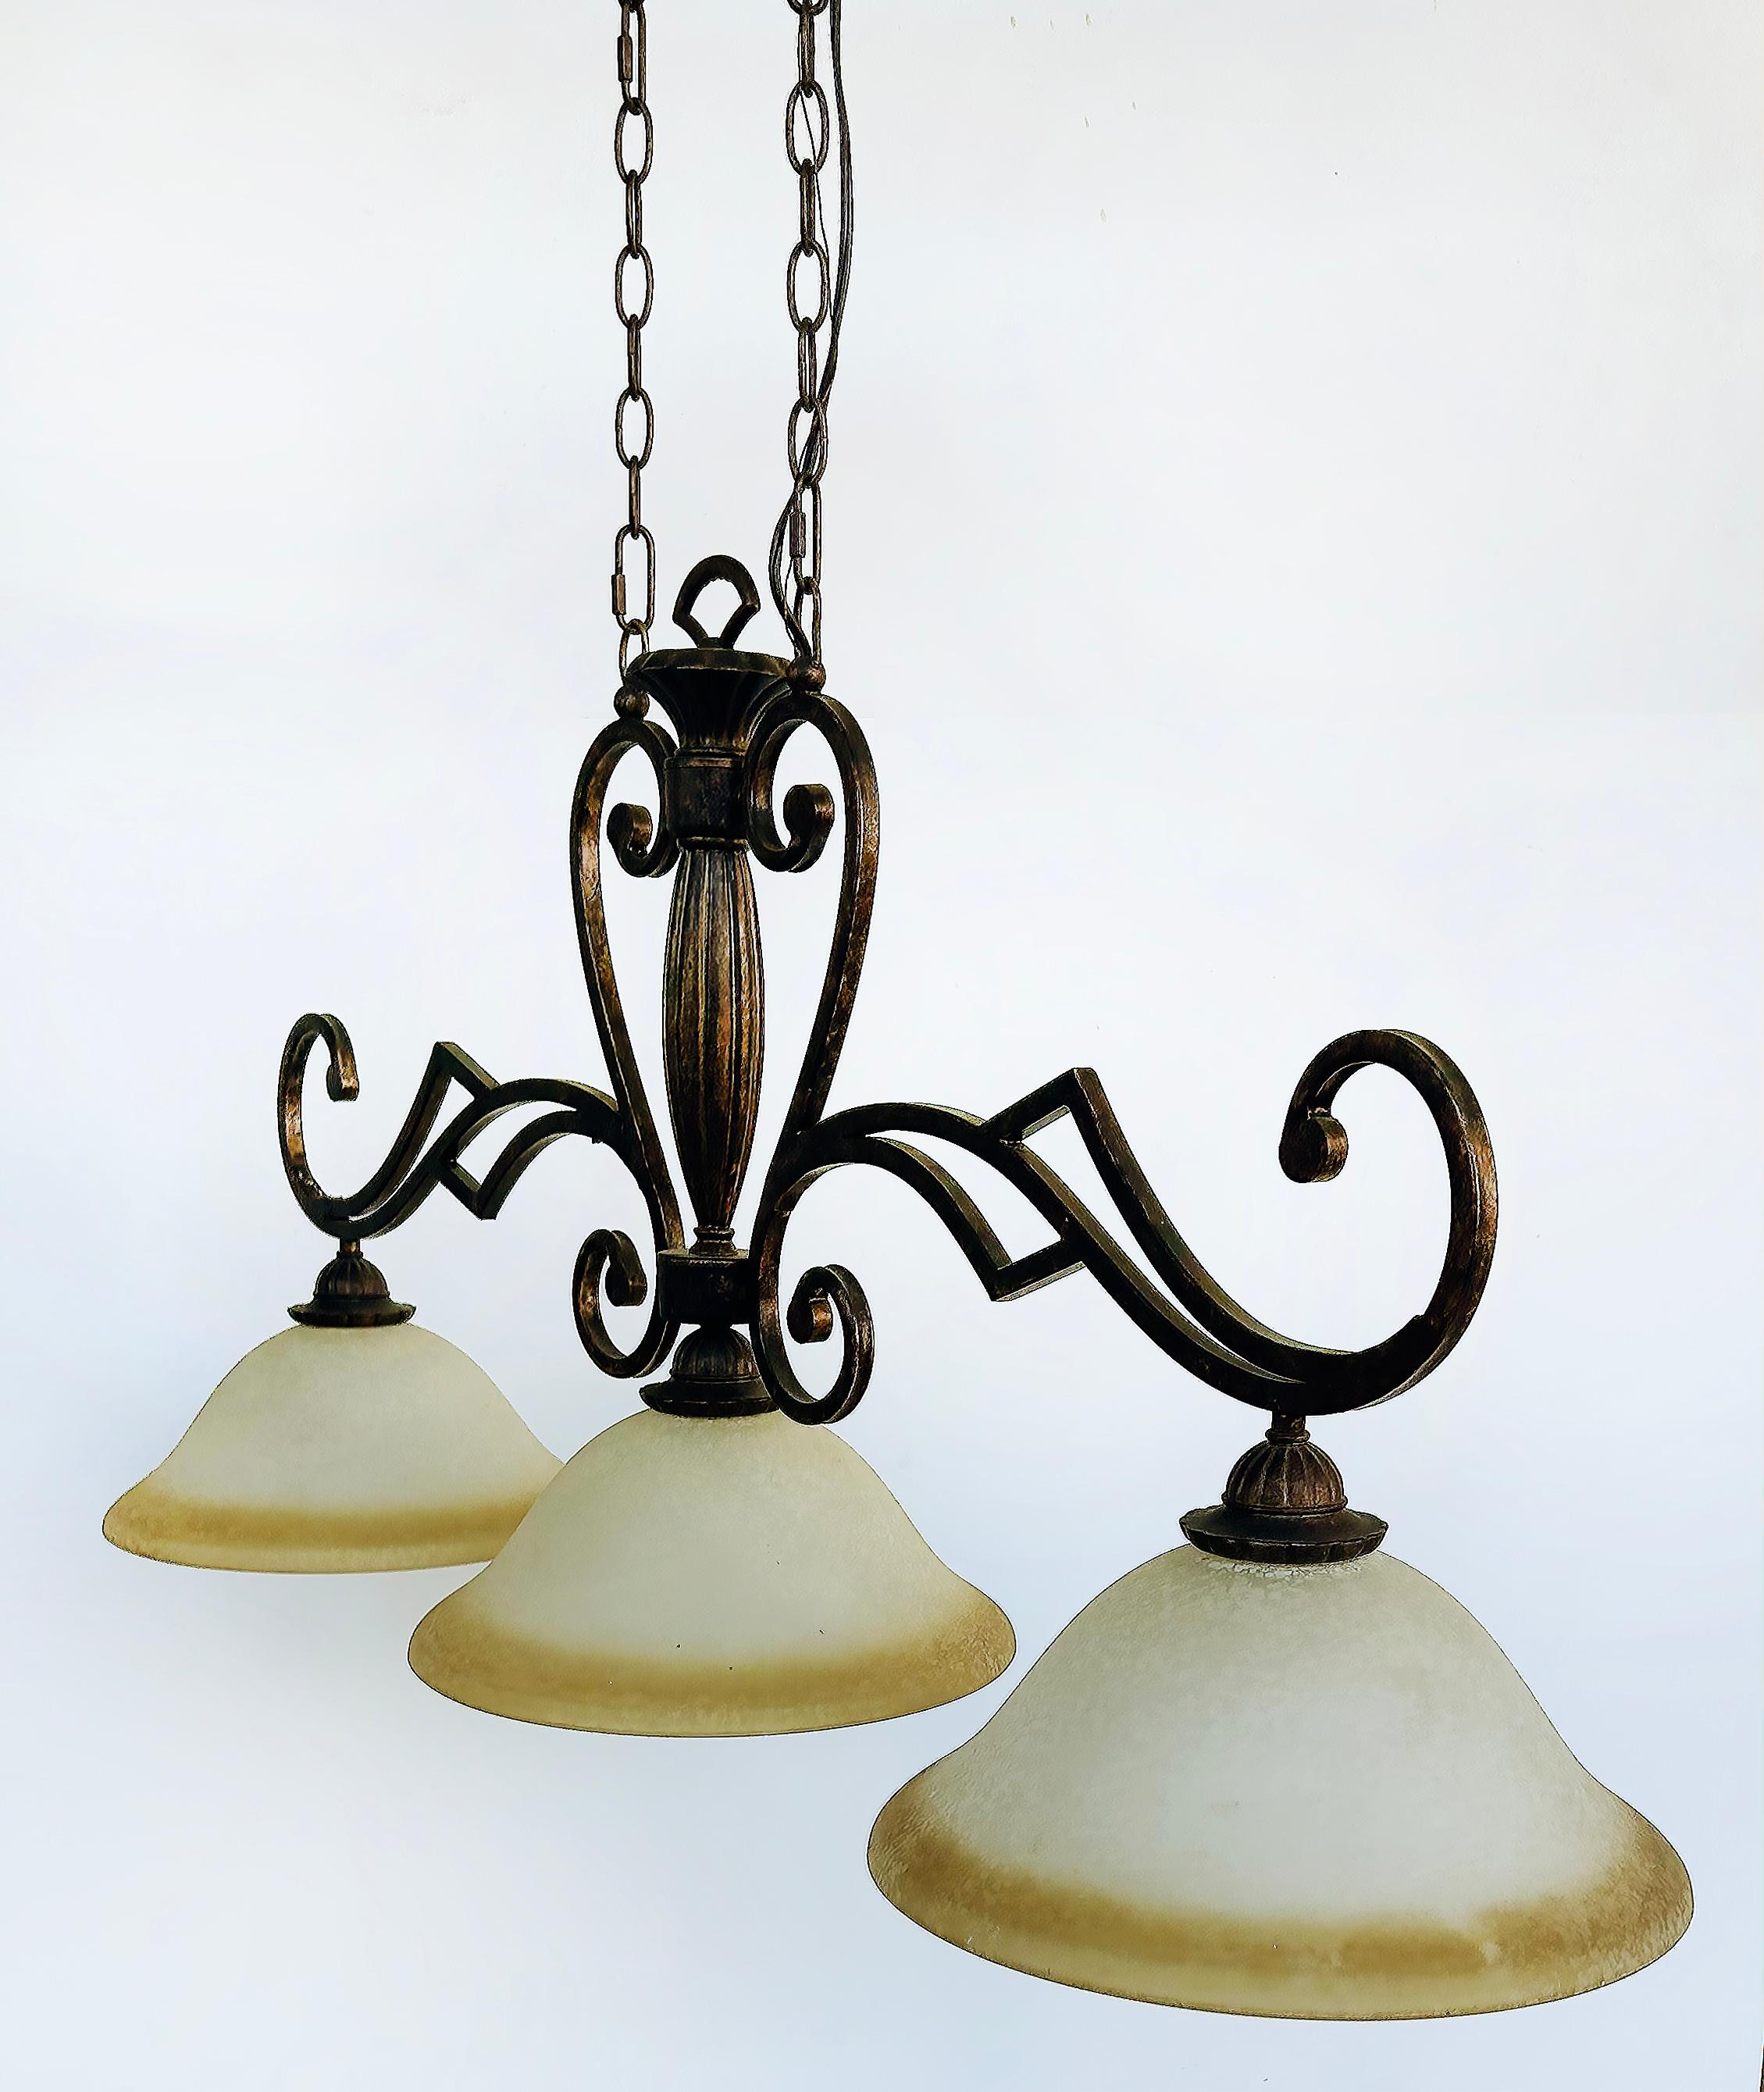 Vintage 3-Light Billiard Table or Kitchen Island Fixture 

Offered for sale is a three-light chandelier pendant light fixture which would be perfect above a billiard table, island or dining room table.  The painted metal frame is patinated in a dark